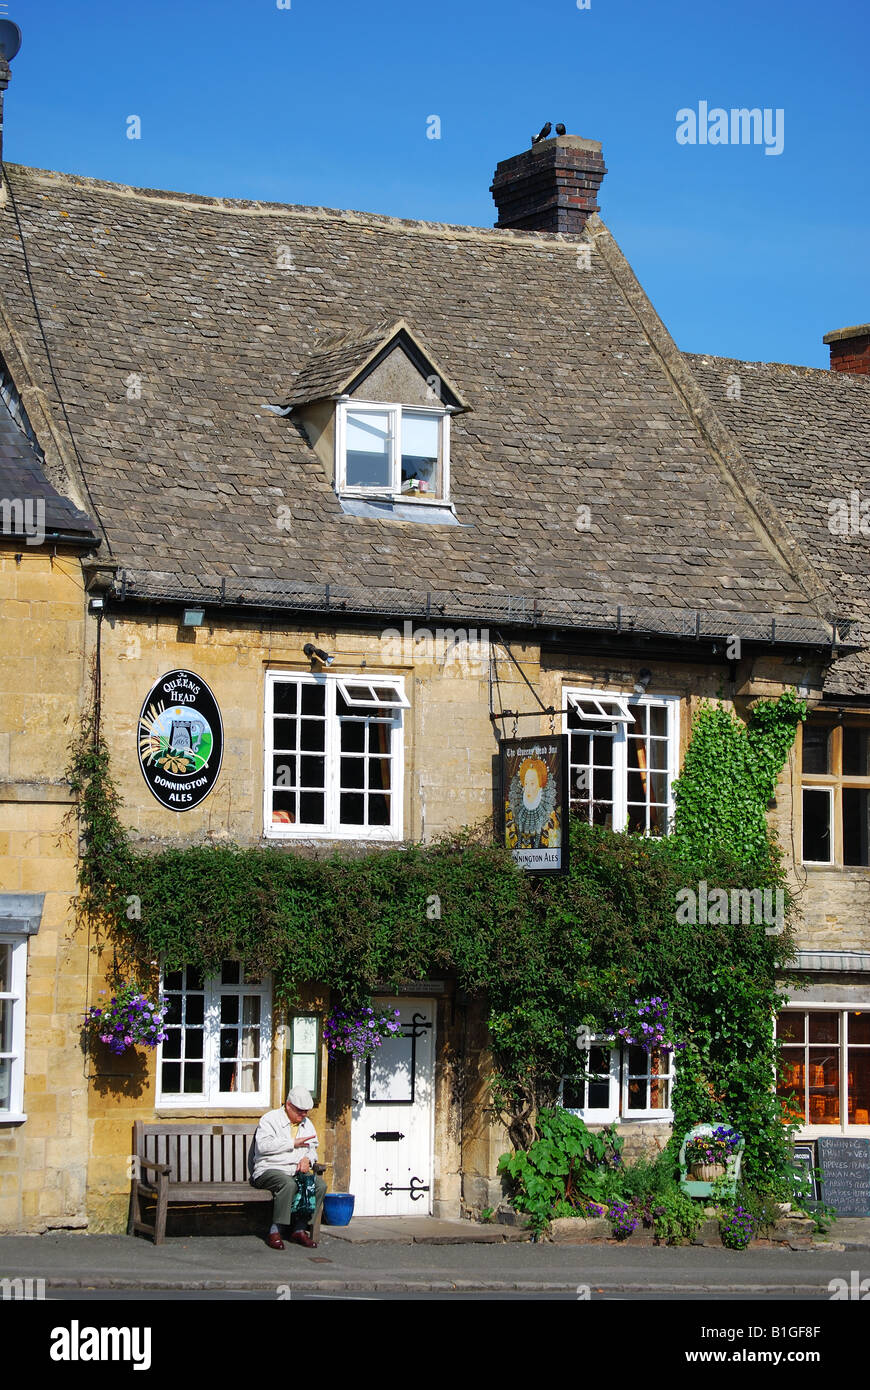 The Queens Head Inn, Market Square, Stow-on-the-Wold, Cotswolds, Gloucestershire, England, United Kingdom Stock Photo